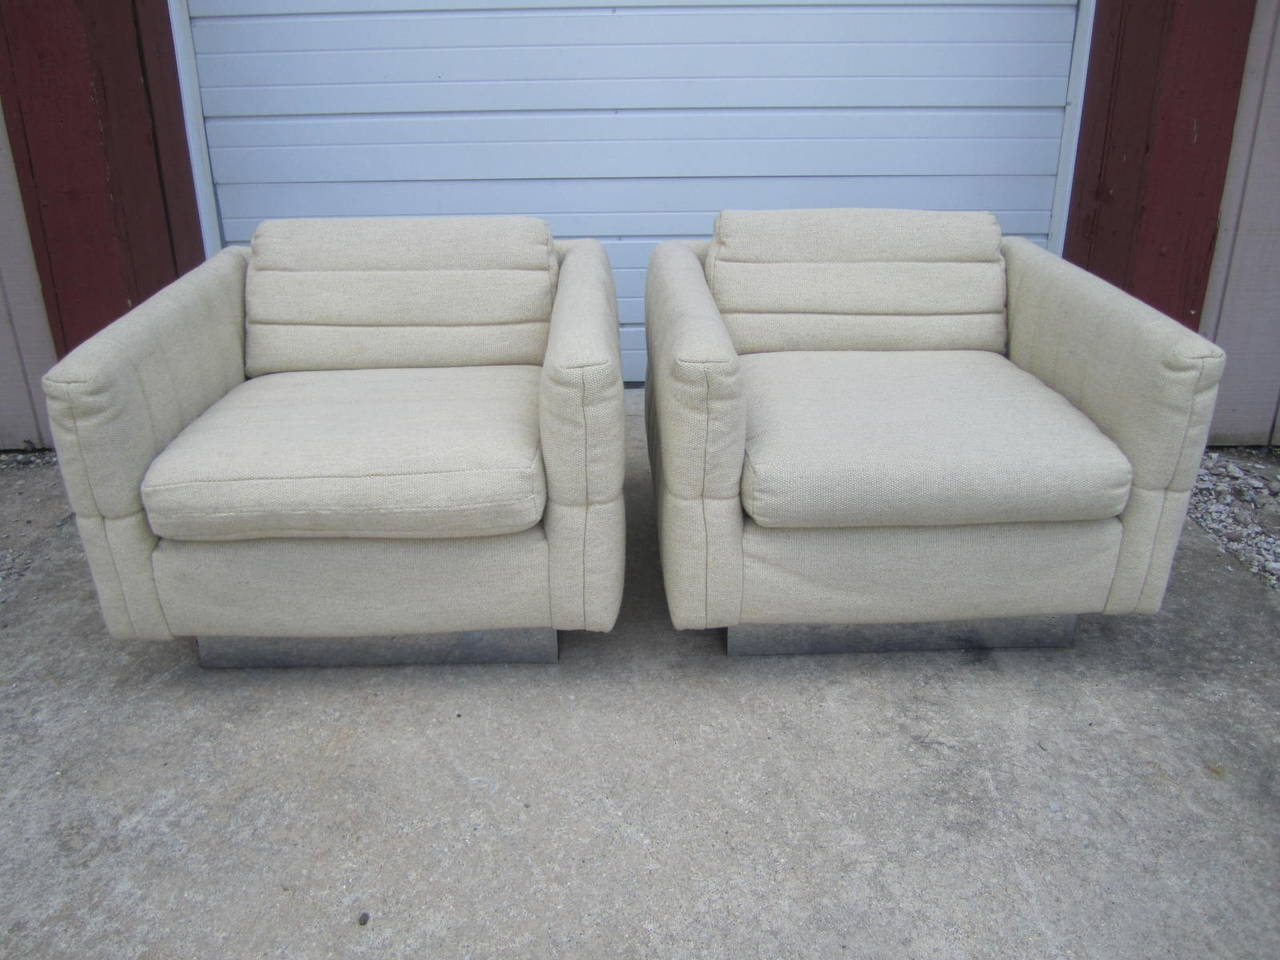 Lovely Pair of Channel Tufted Milo Baughman Cube Chairs Chrome Base Mid-Century For Sale 1